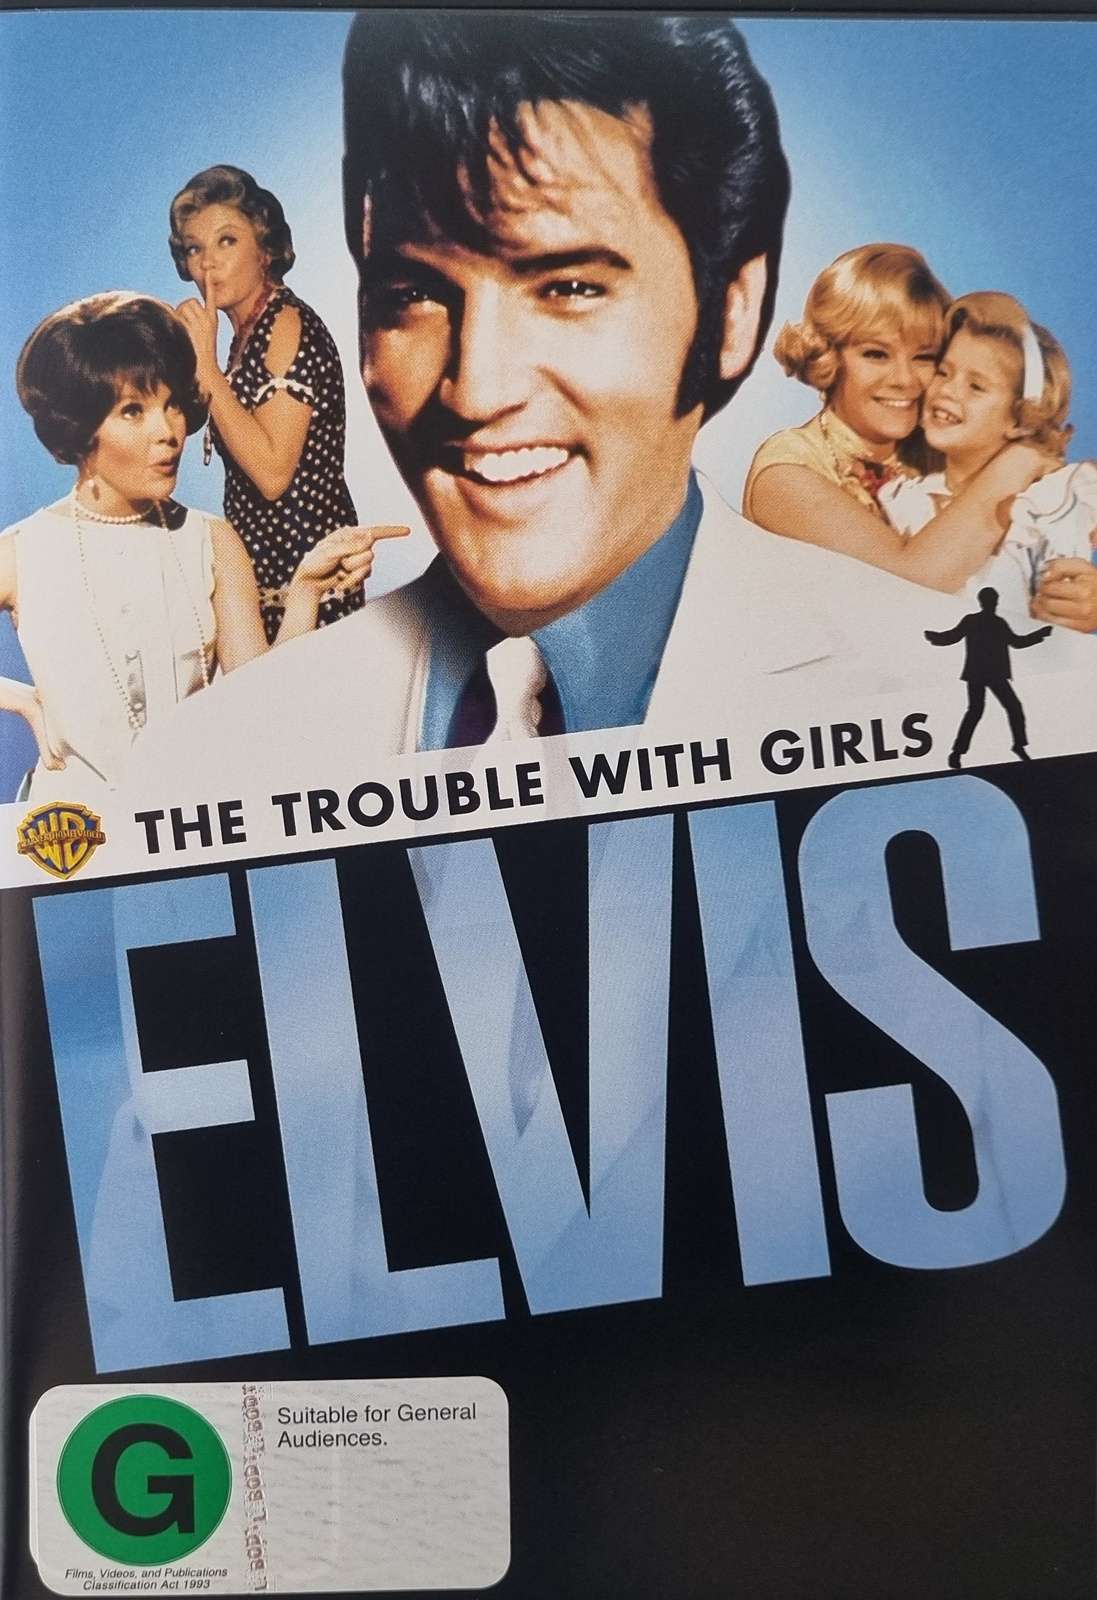 The Trouble With Girls (DVD)